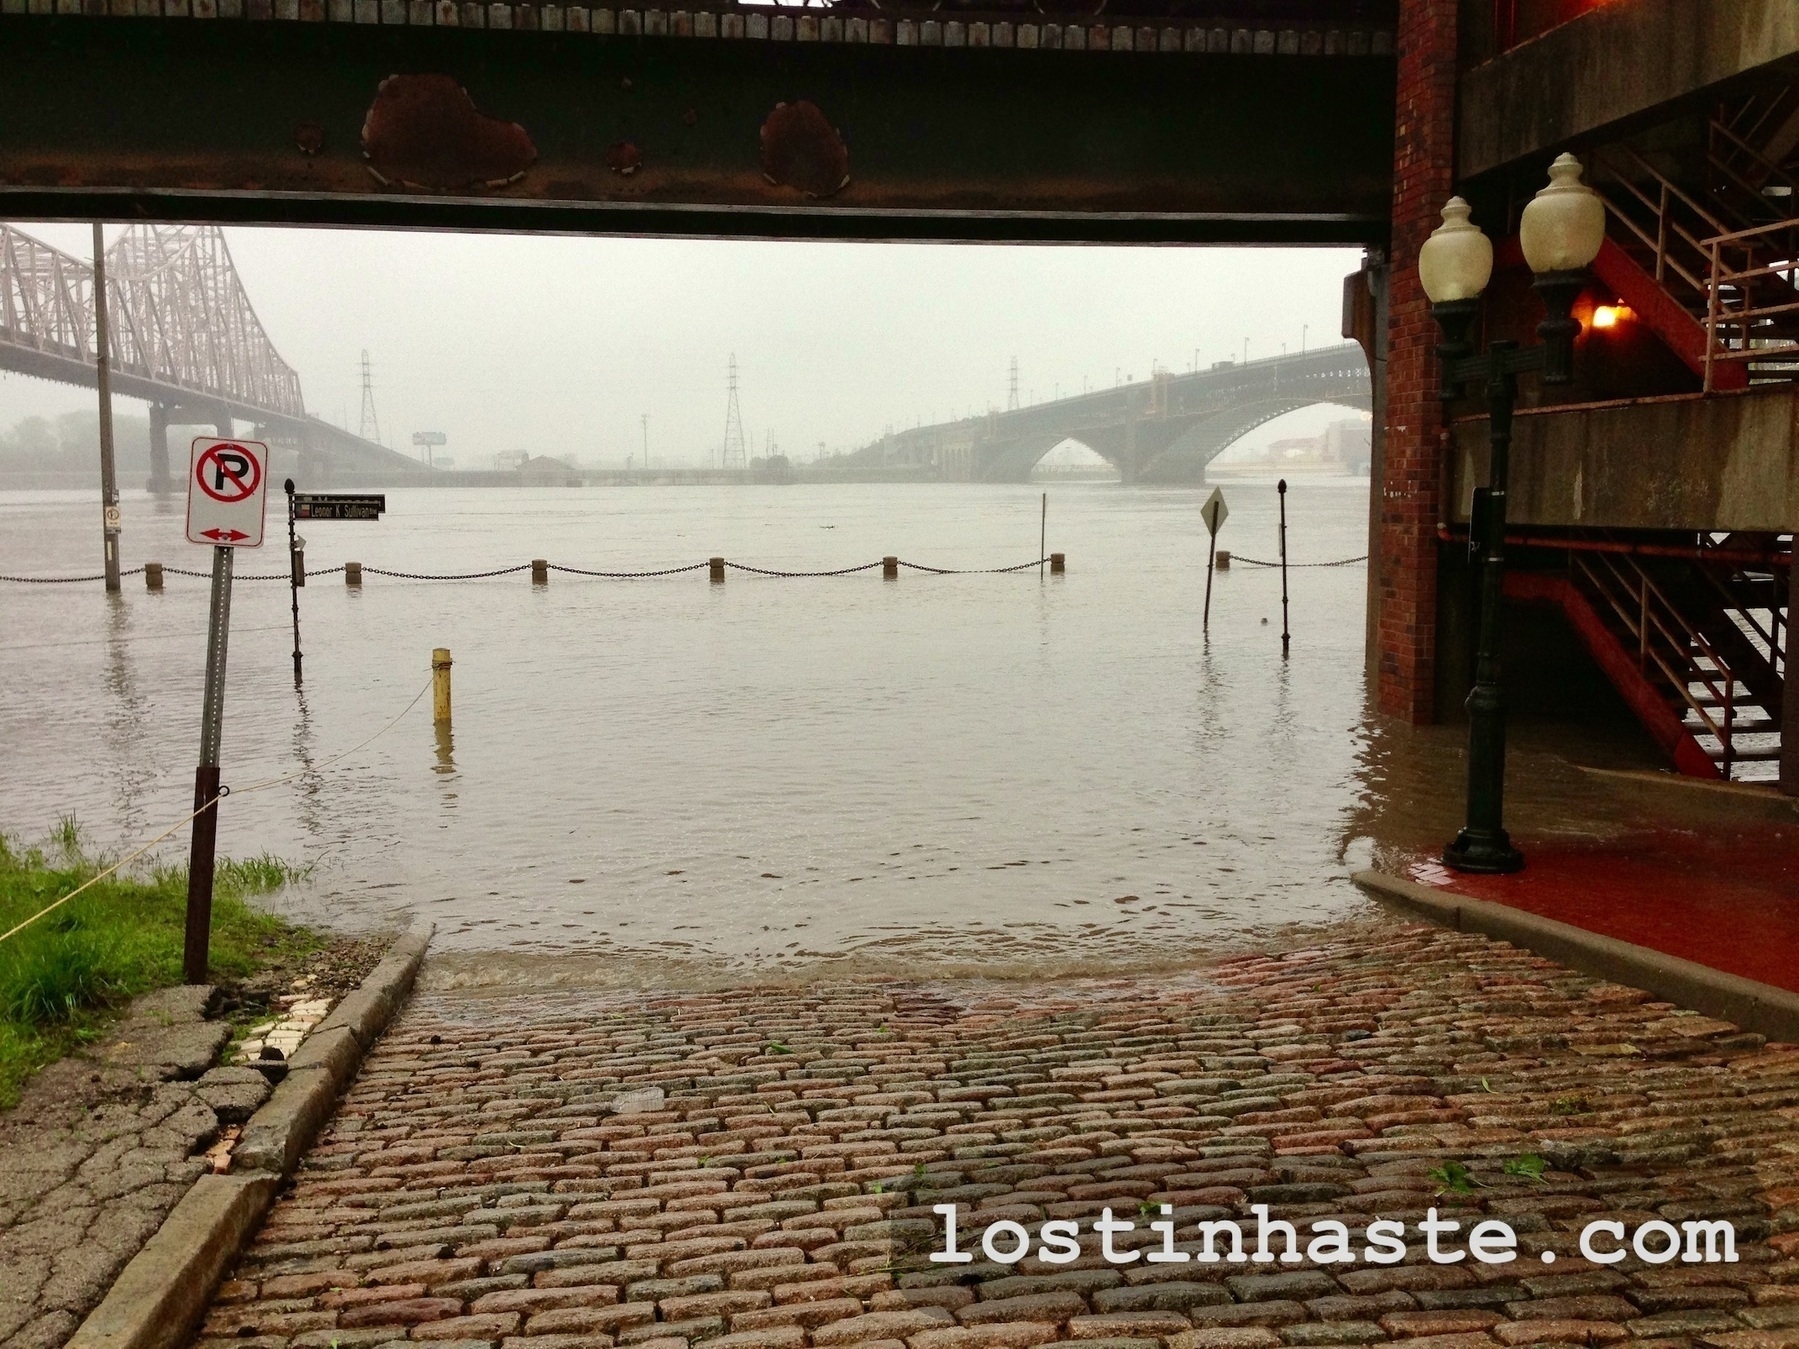 Floodwater covers a cobblestone street and sidewalk, with submerged traffic signs and street lamps, near bridges and buildings. Visible text: 'lostinhaste.com'